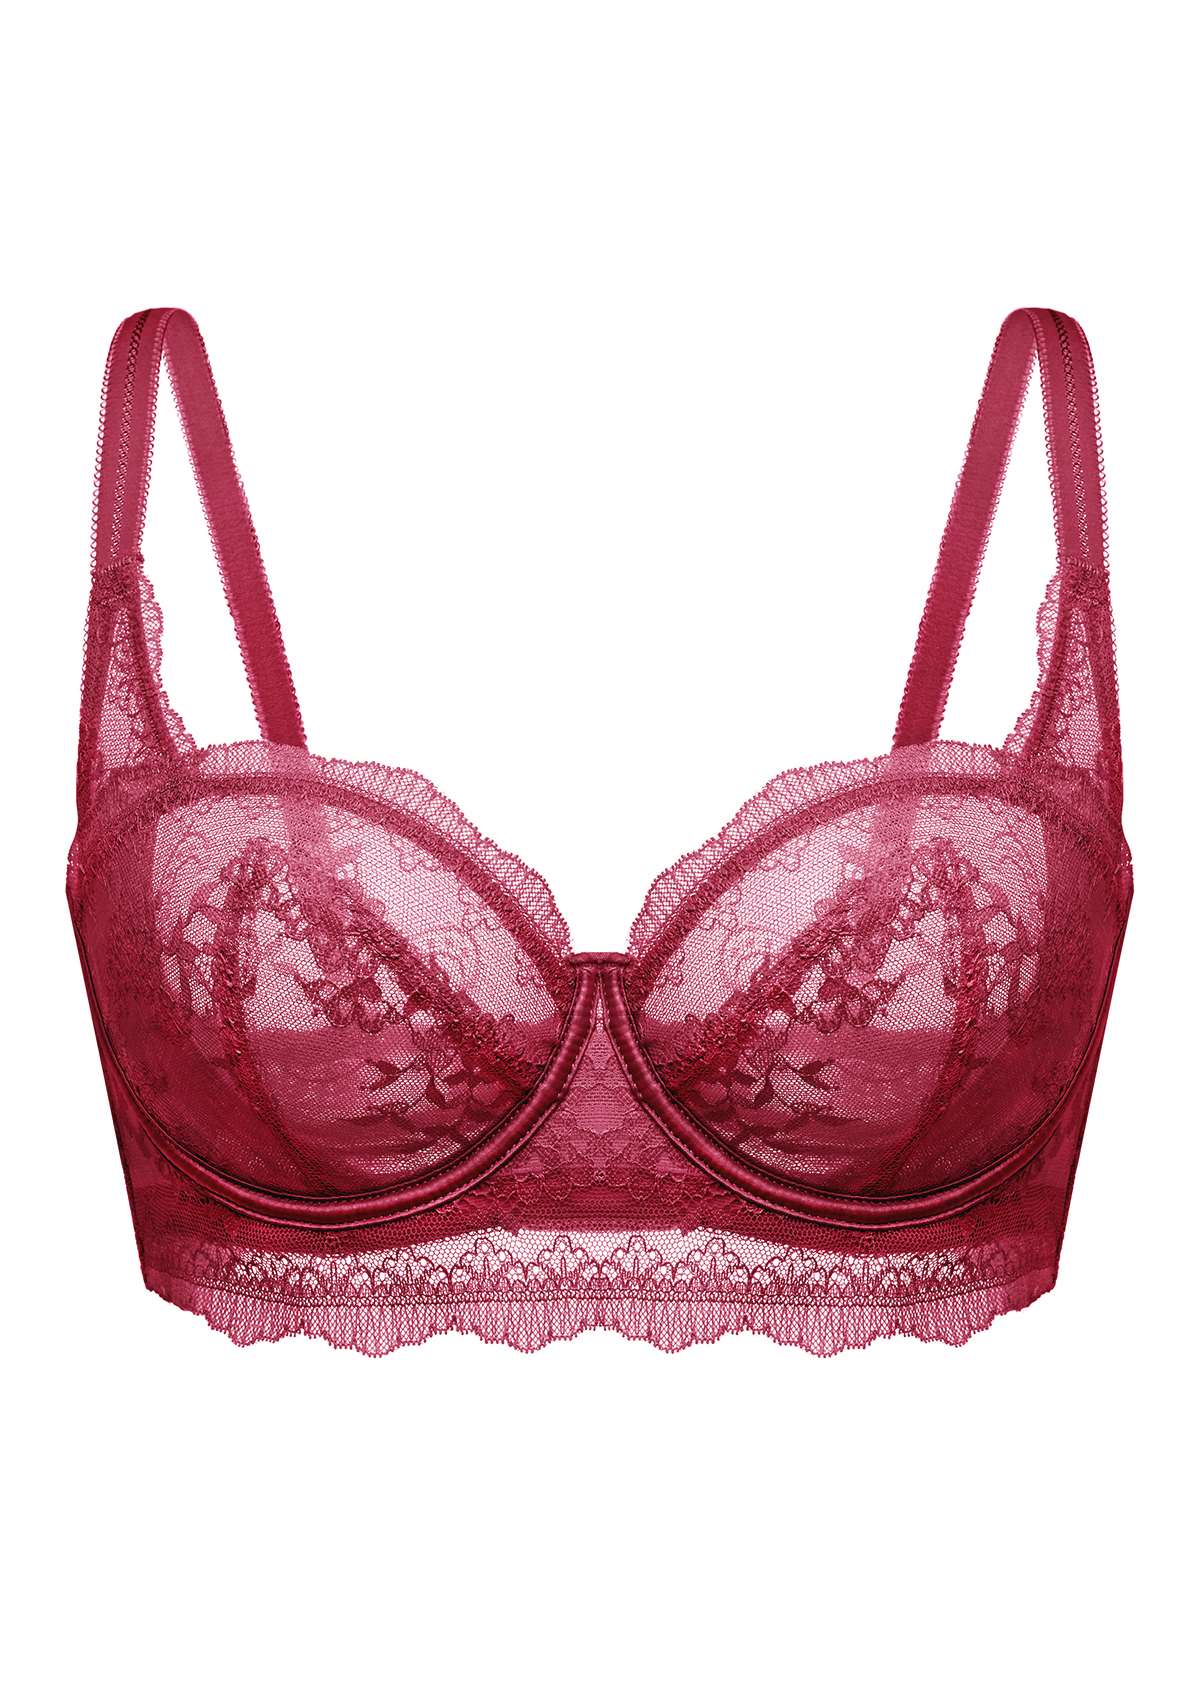 HSIA Floral Lace Unlined Bridal Balconette Bra Set - Supportive Classic - Burgundy / 34 / DDD/F